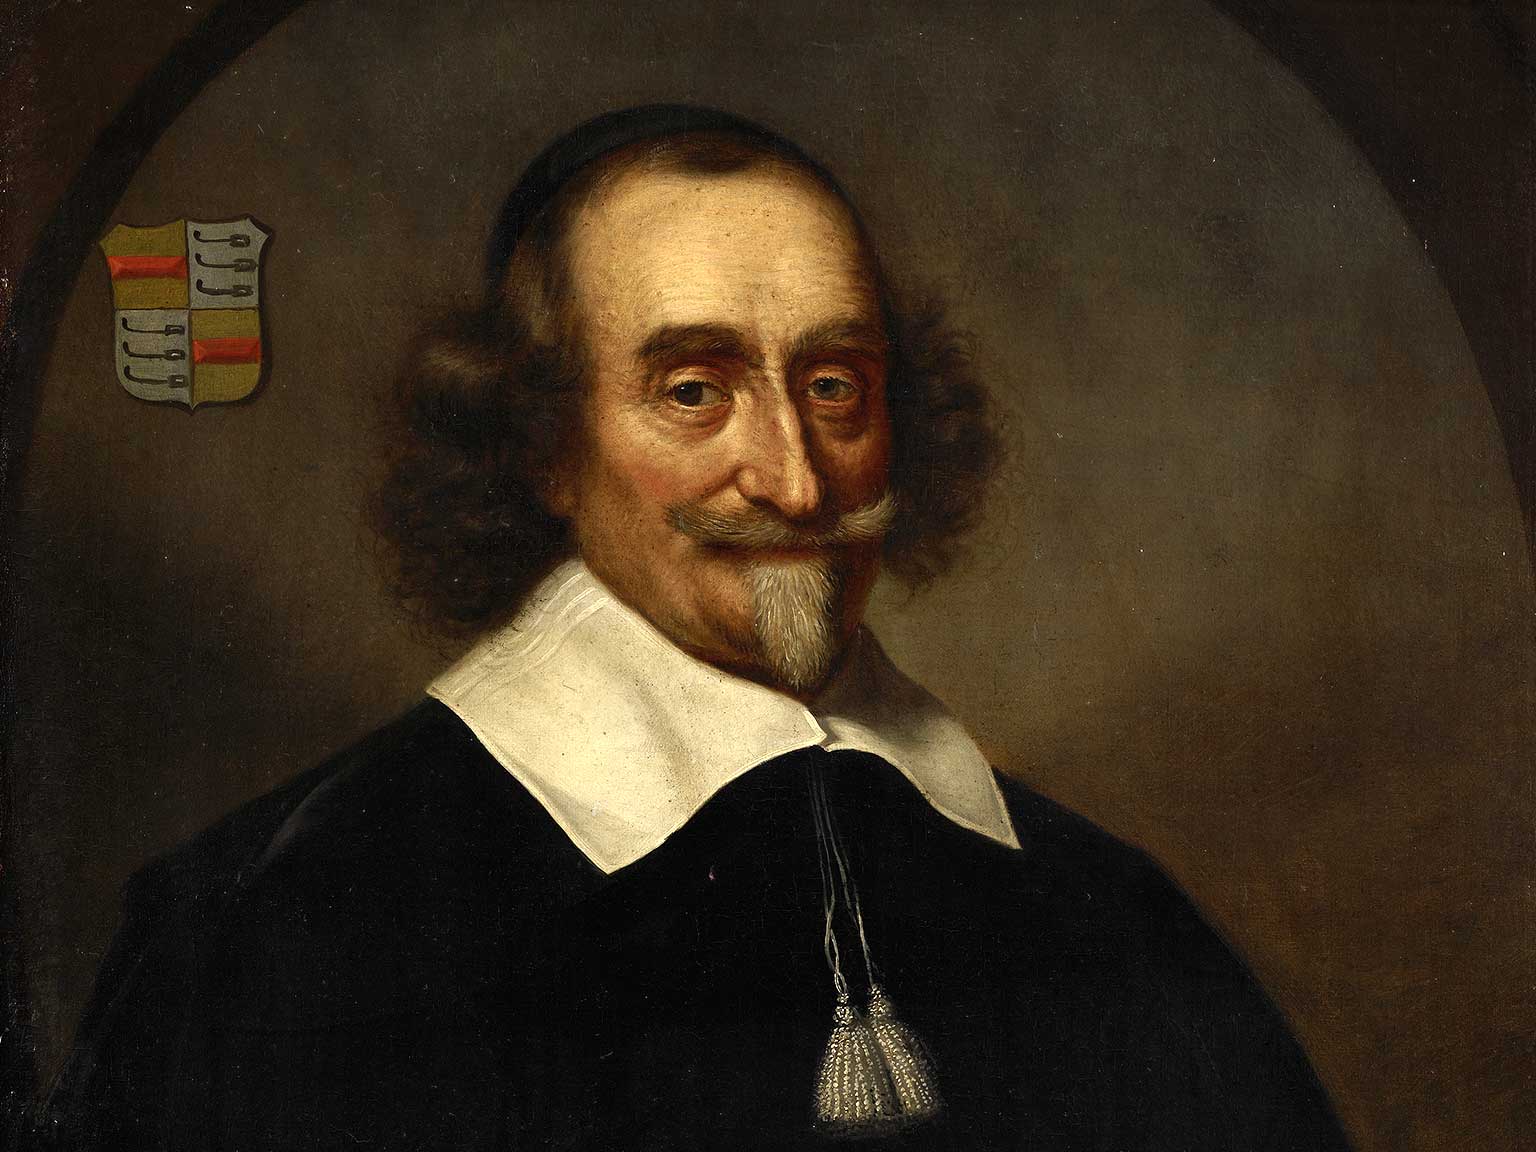 Detail of a portrait of Jan Gerritsz Bicker from 1663, attributed to Wallerant Vaillant